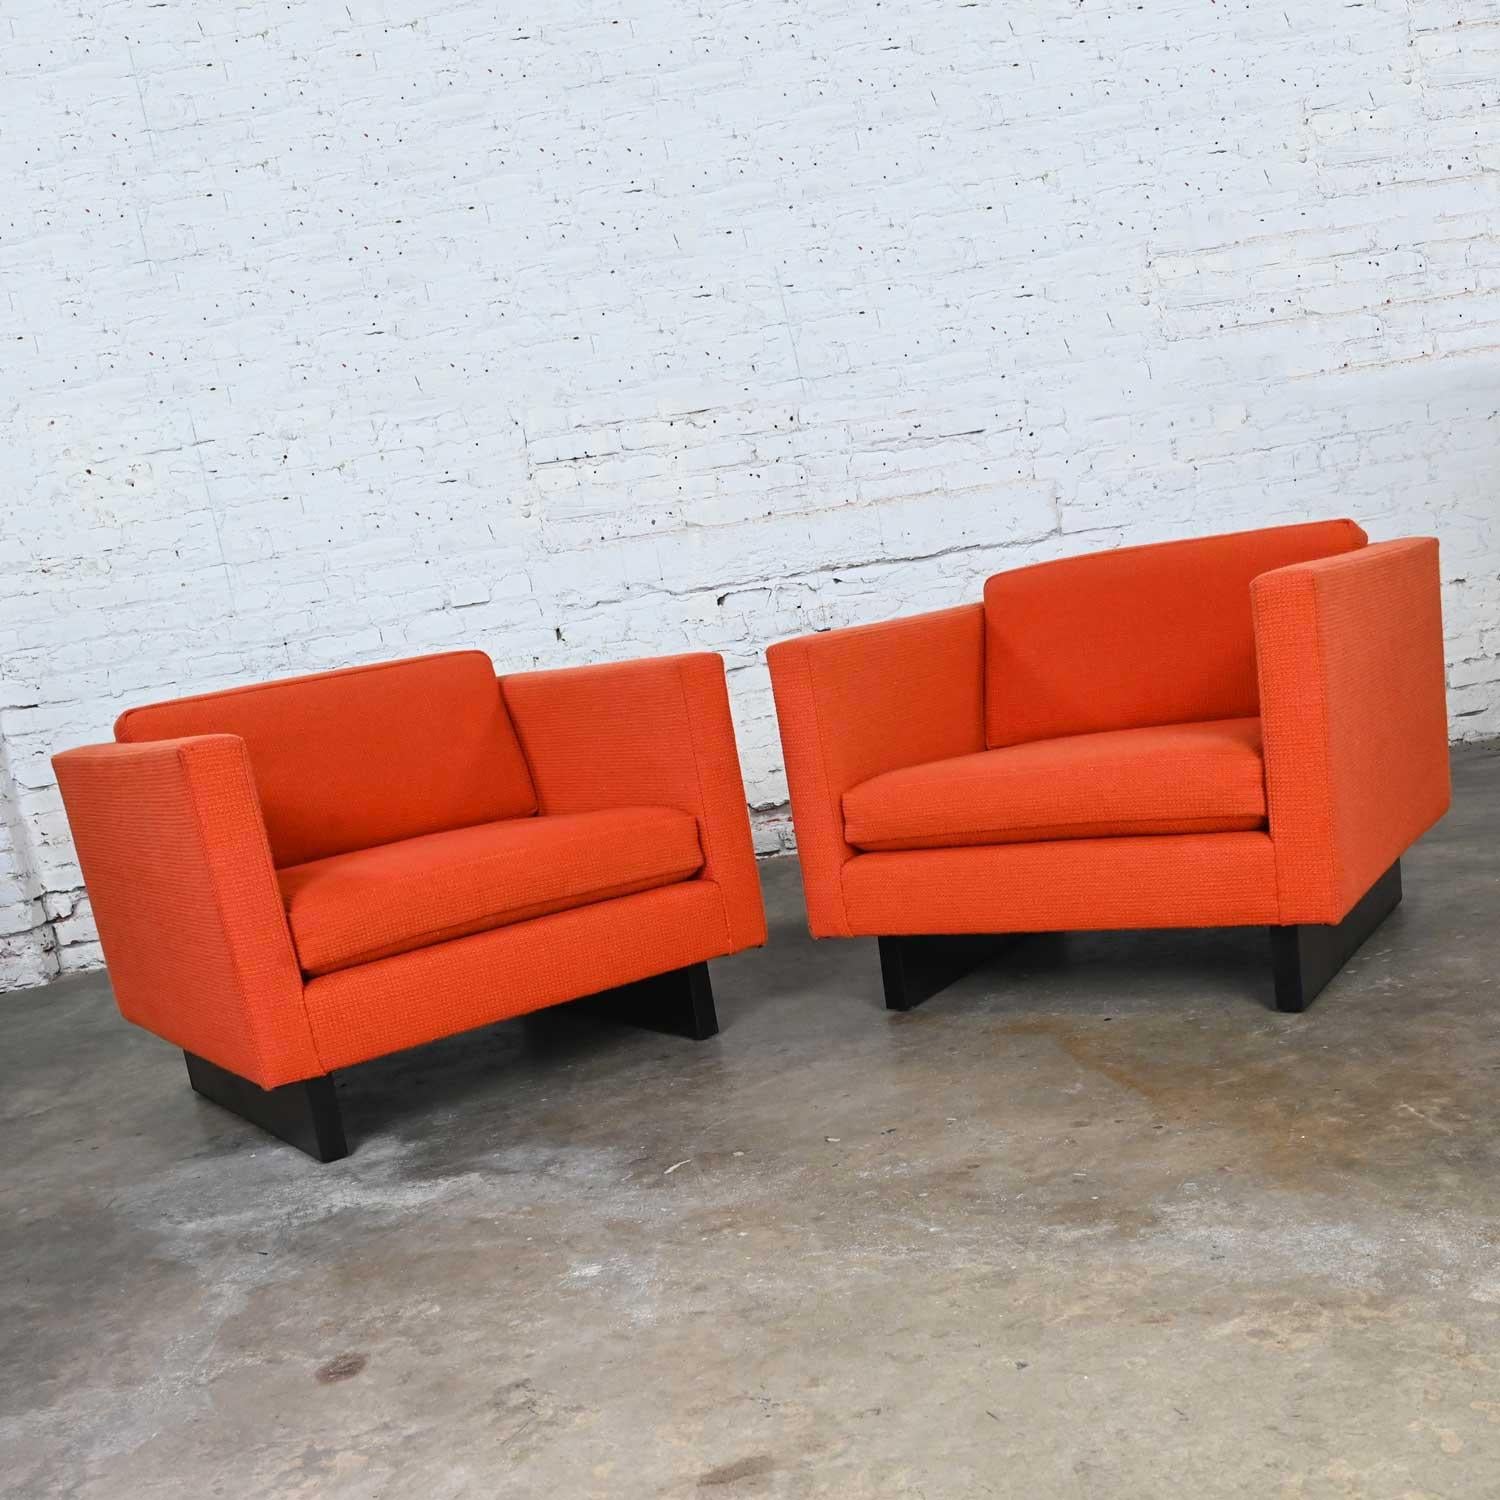 1970s Mcm to Modern Harvey Probber Club Chairs Orange 1571 Tuxedo Sleigh Bases For Sale 5